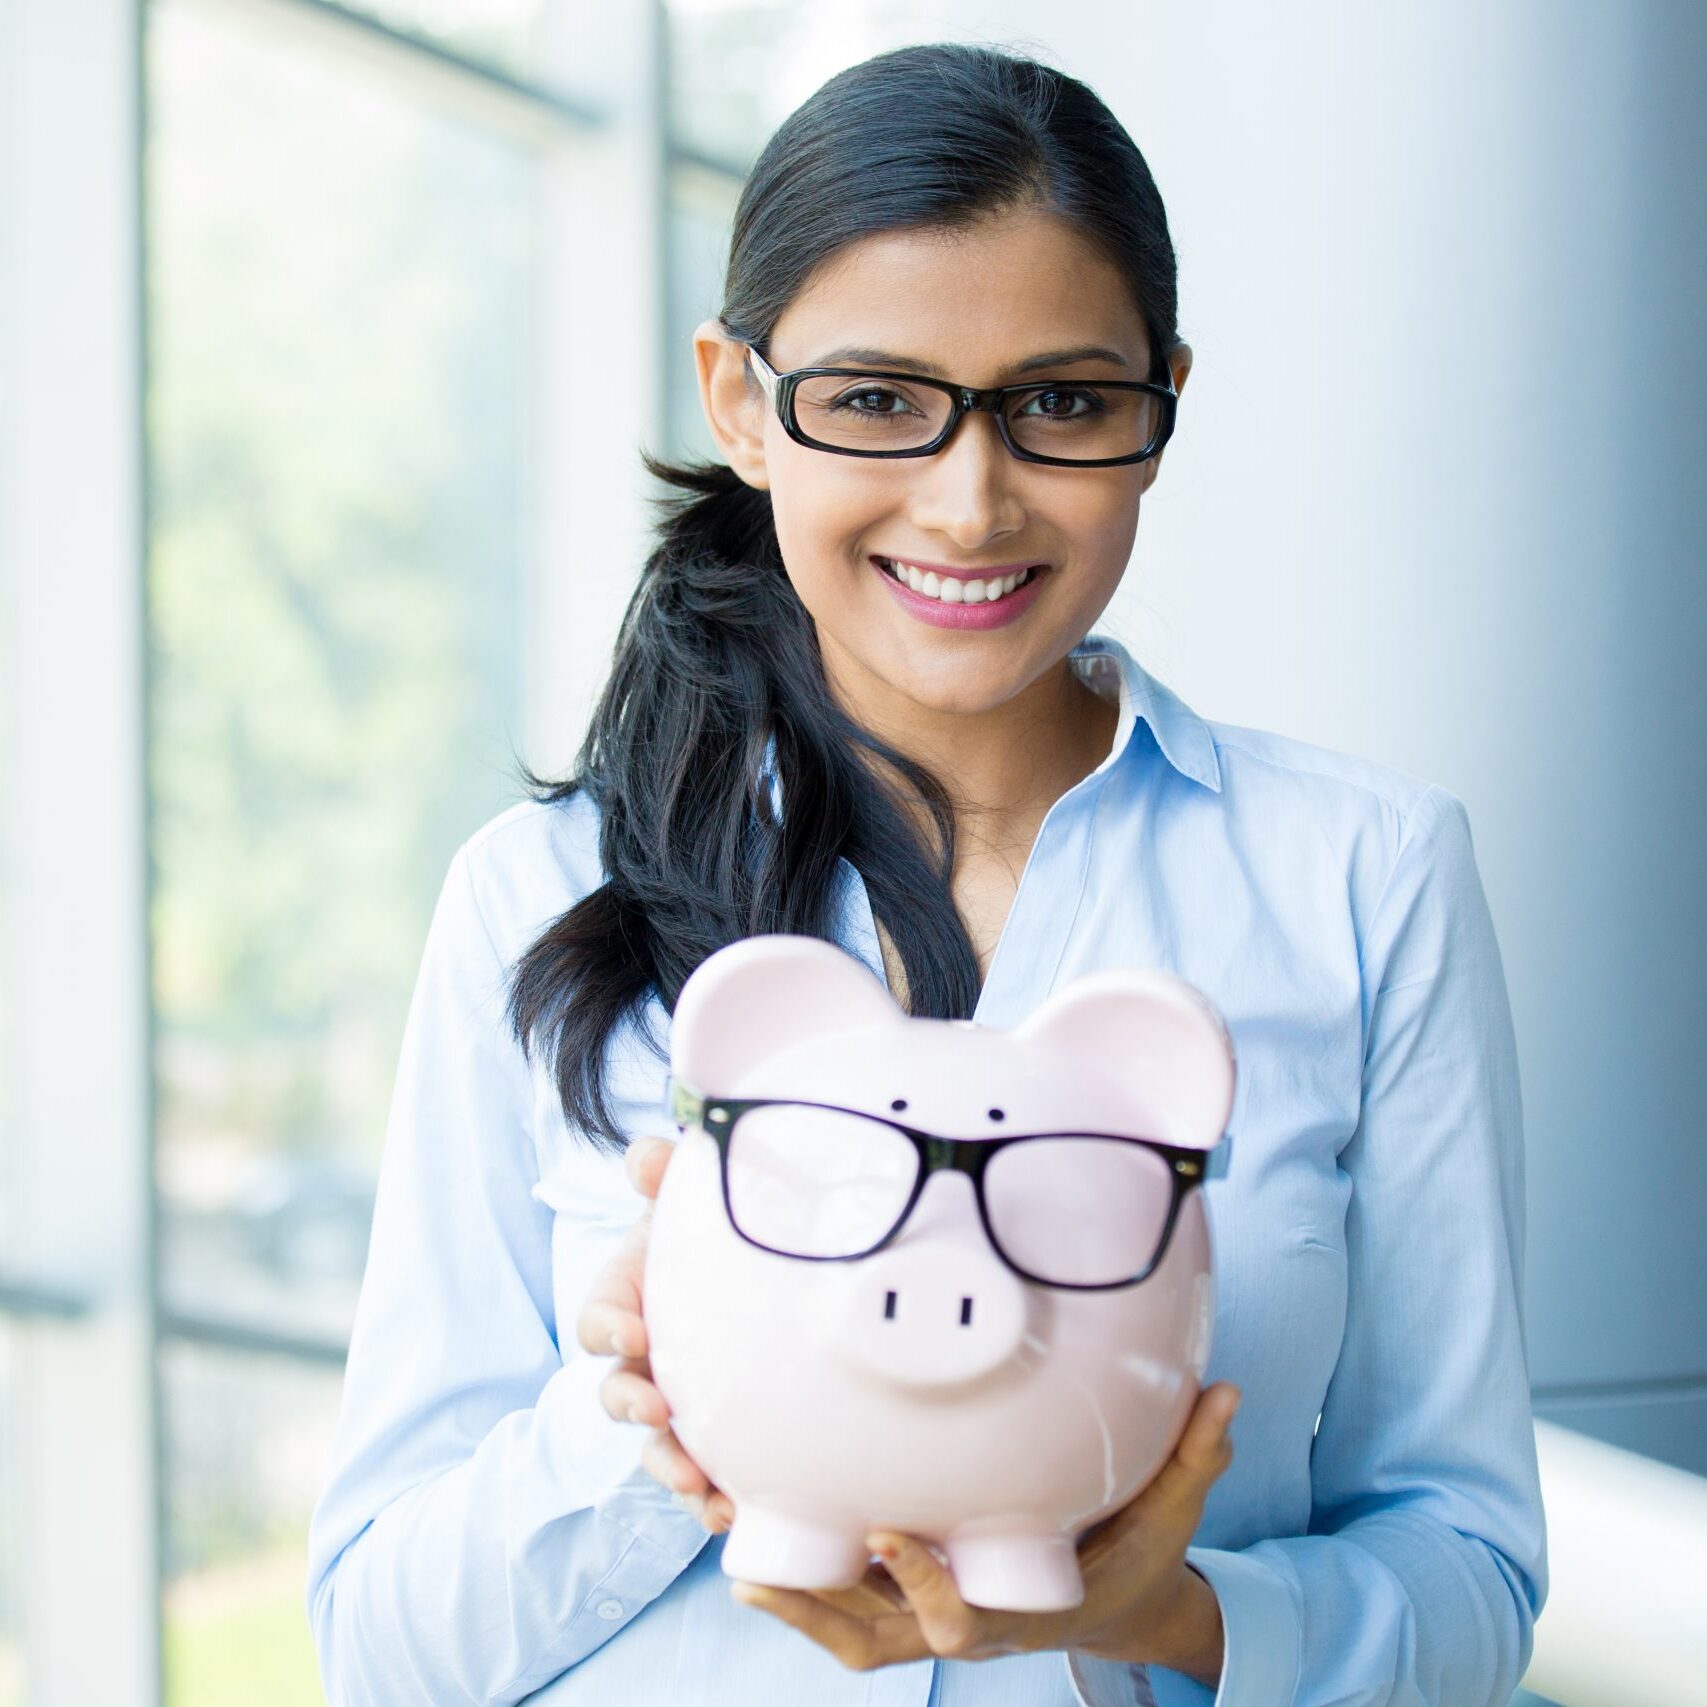 Small Business Strong - Woman Financial Aid Assistance